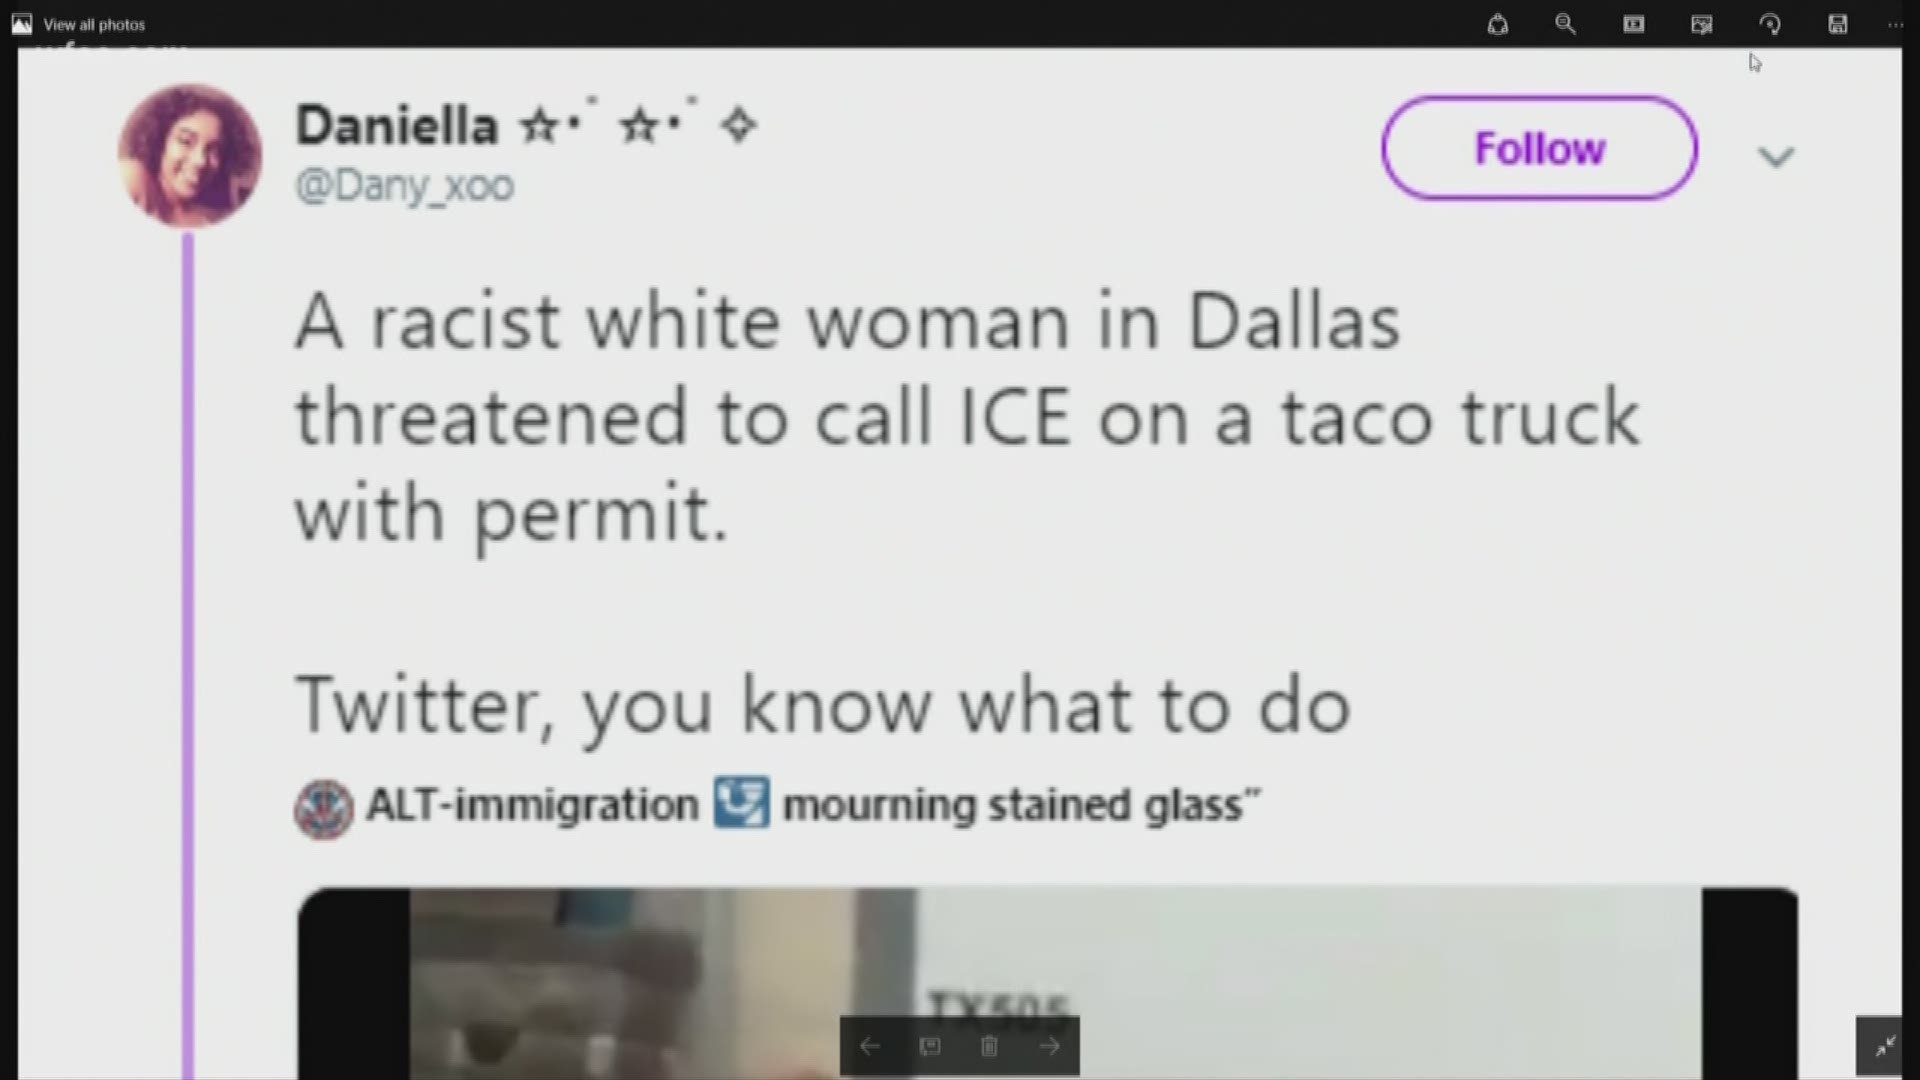 The Dallas woman's threat to "call ICE" on taco truck vendors was spread by a Russian disinformation campaign.